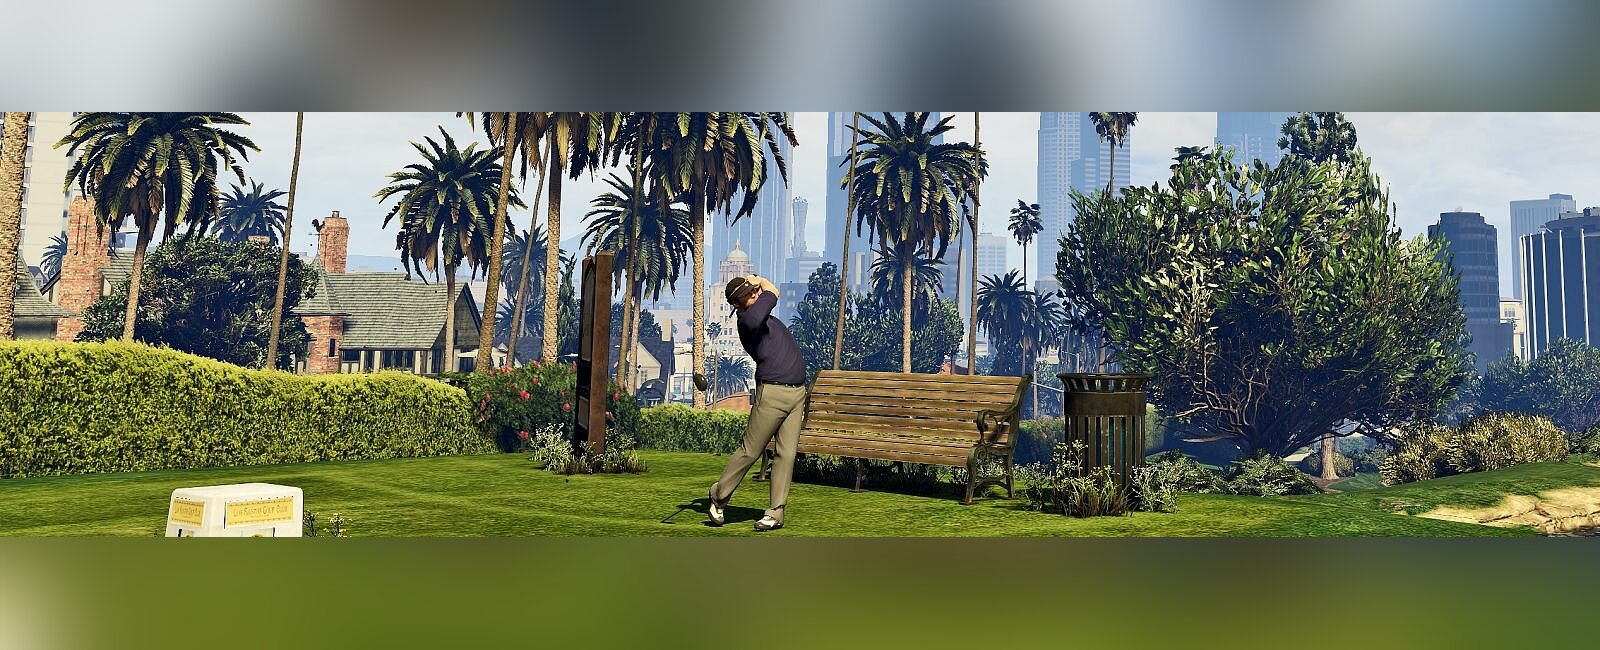 Mind-blowing GTA 5 video makes the game look REAL after AI used to 'hack'  graphics